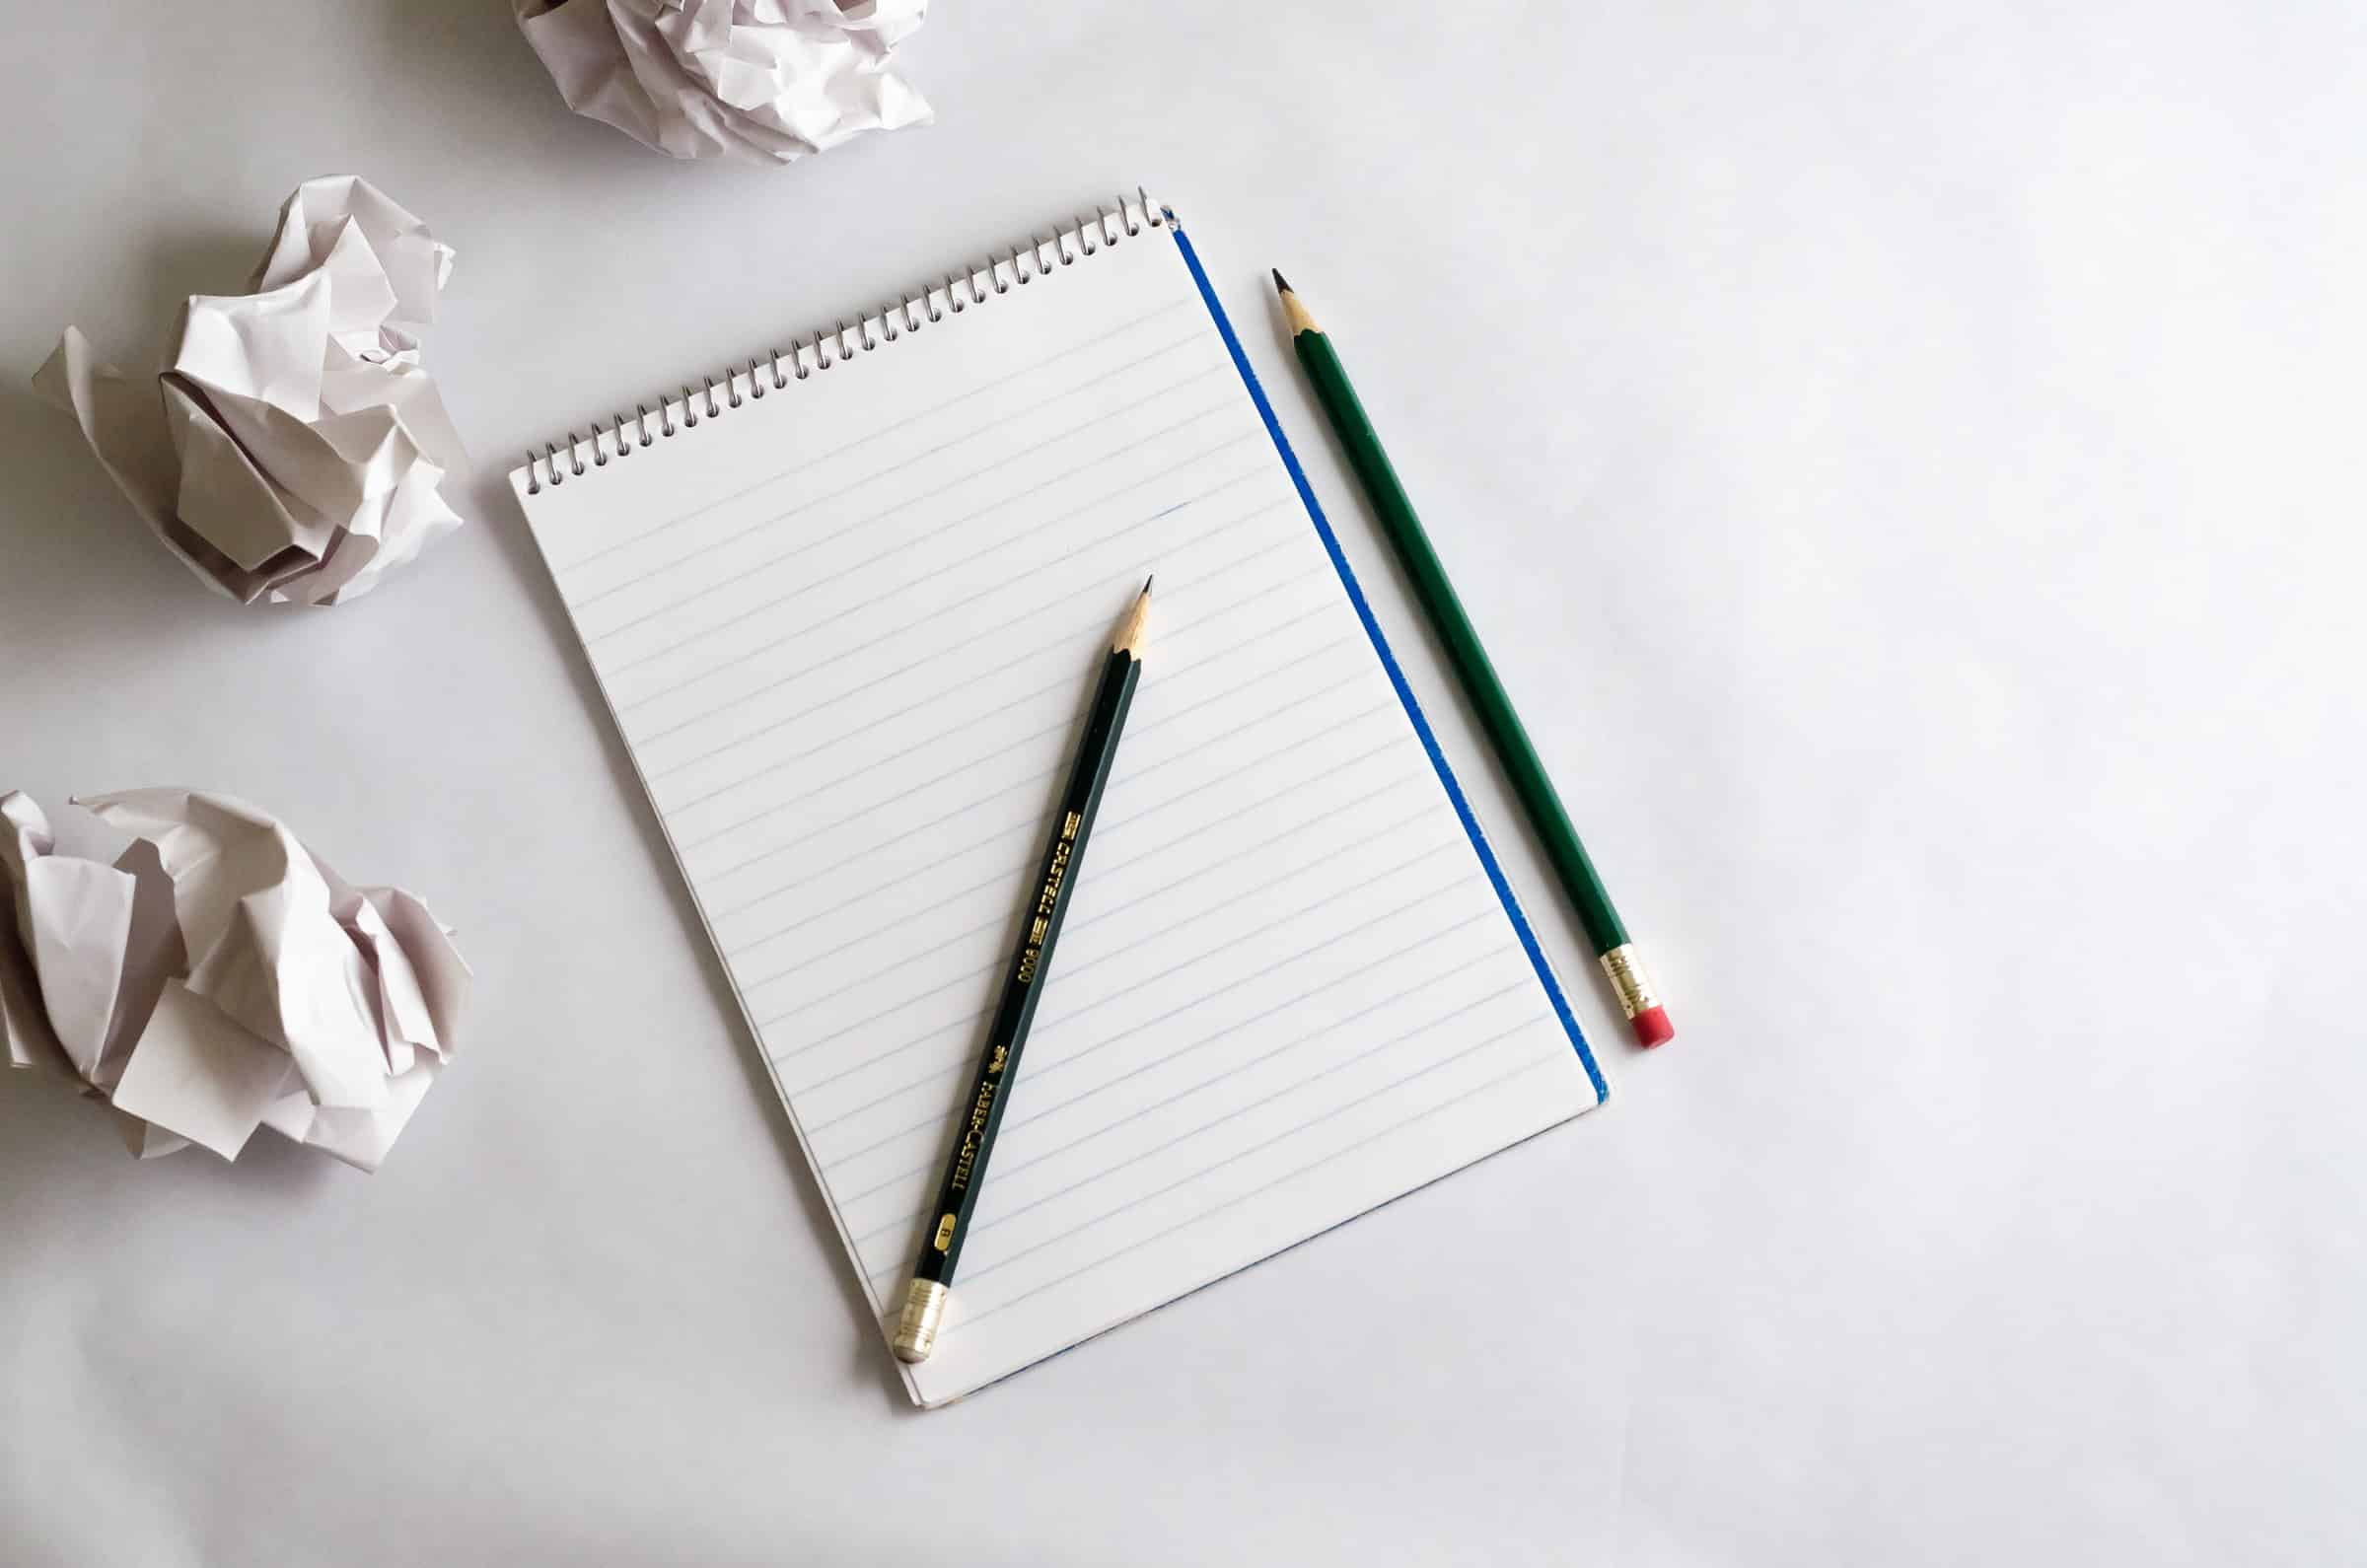 The image shows an empty notepad. Two pencils and three balls of crumpled paper are strewn around it.